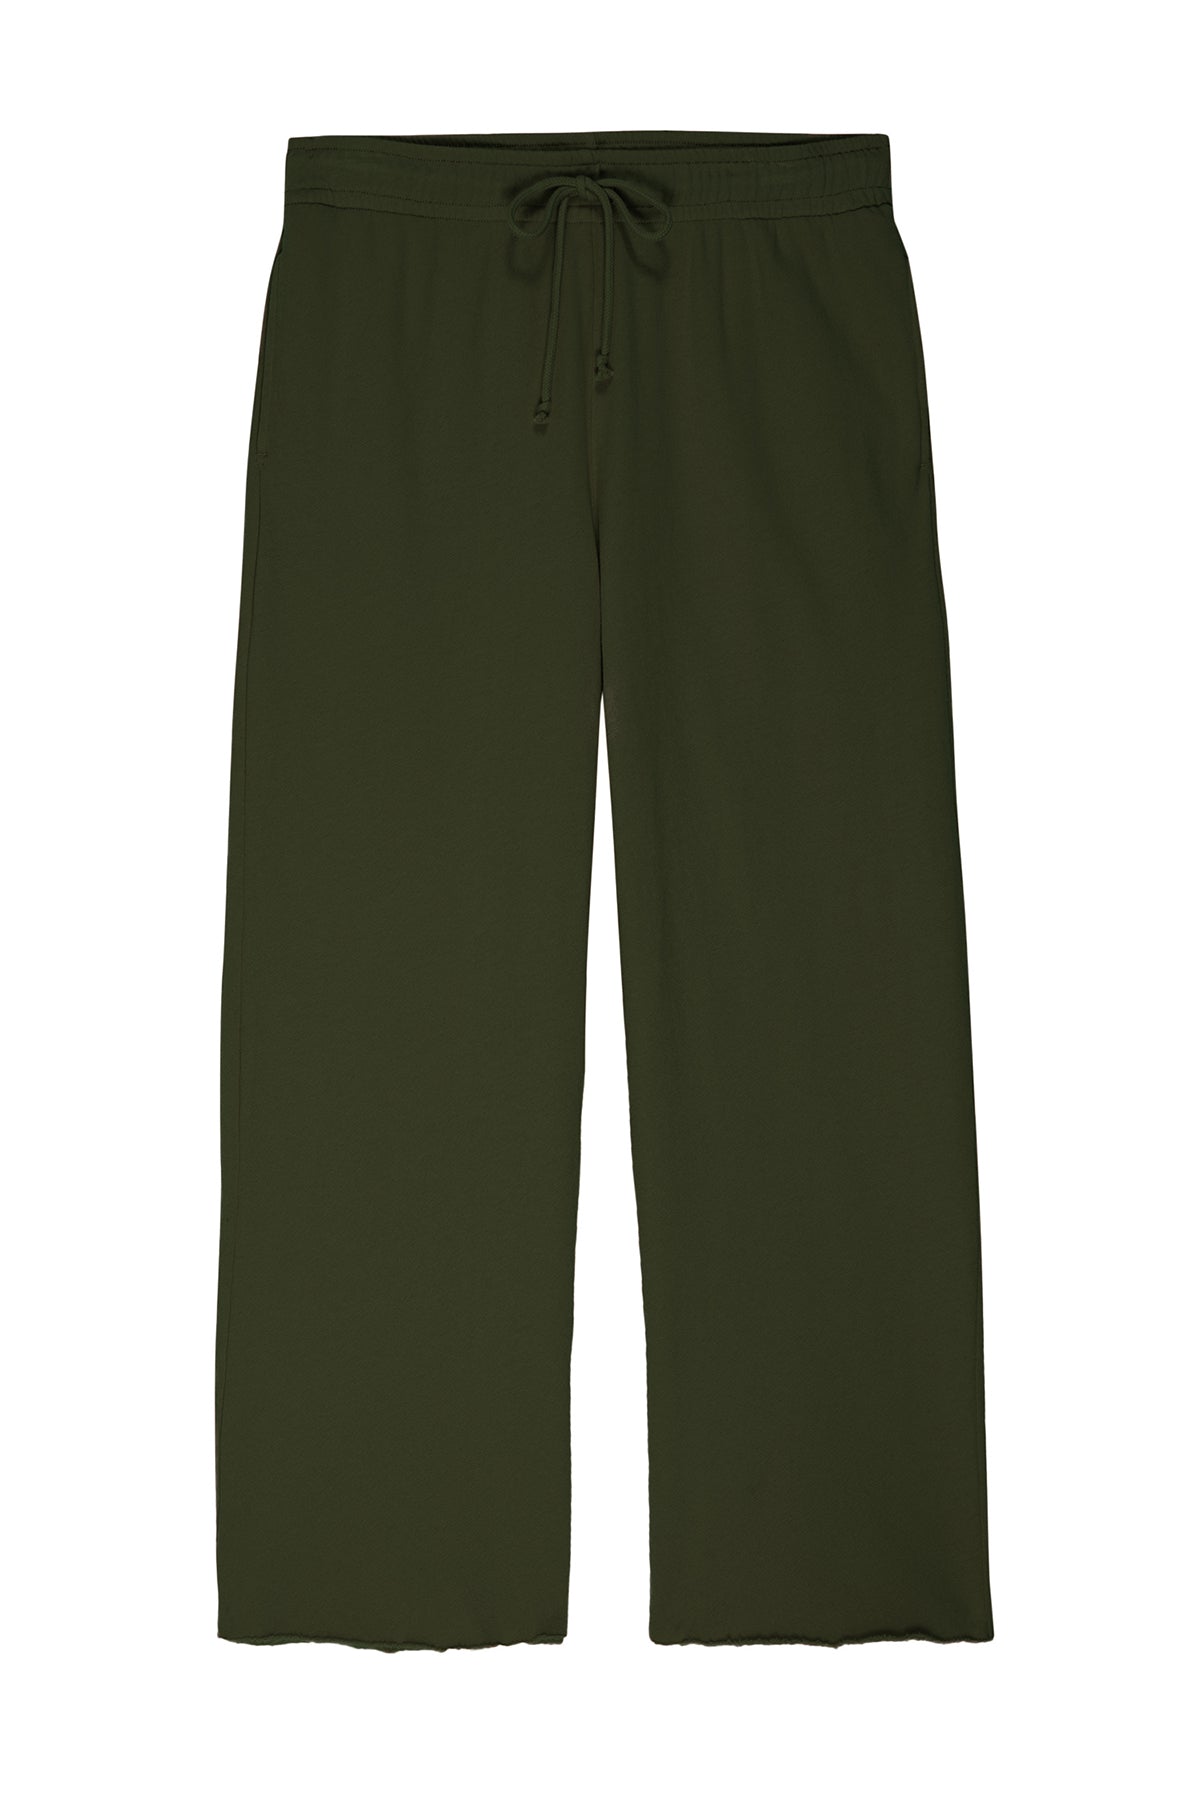   montecito pant dillweed front flat 